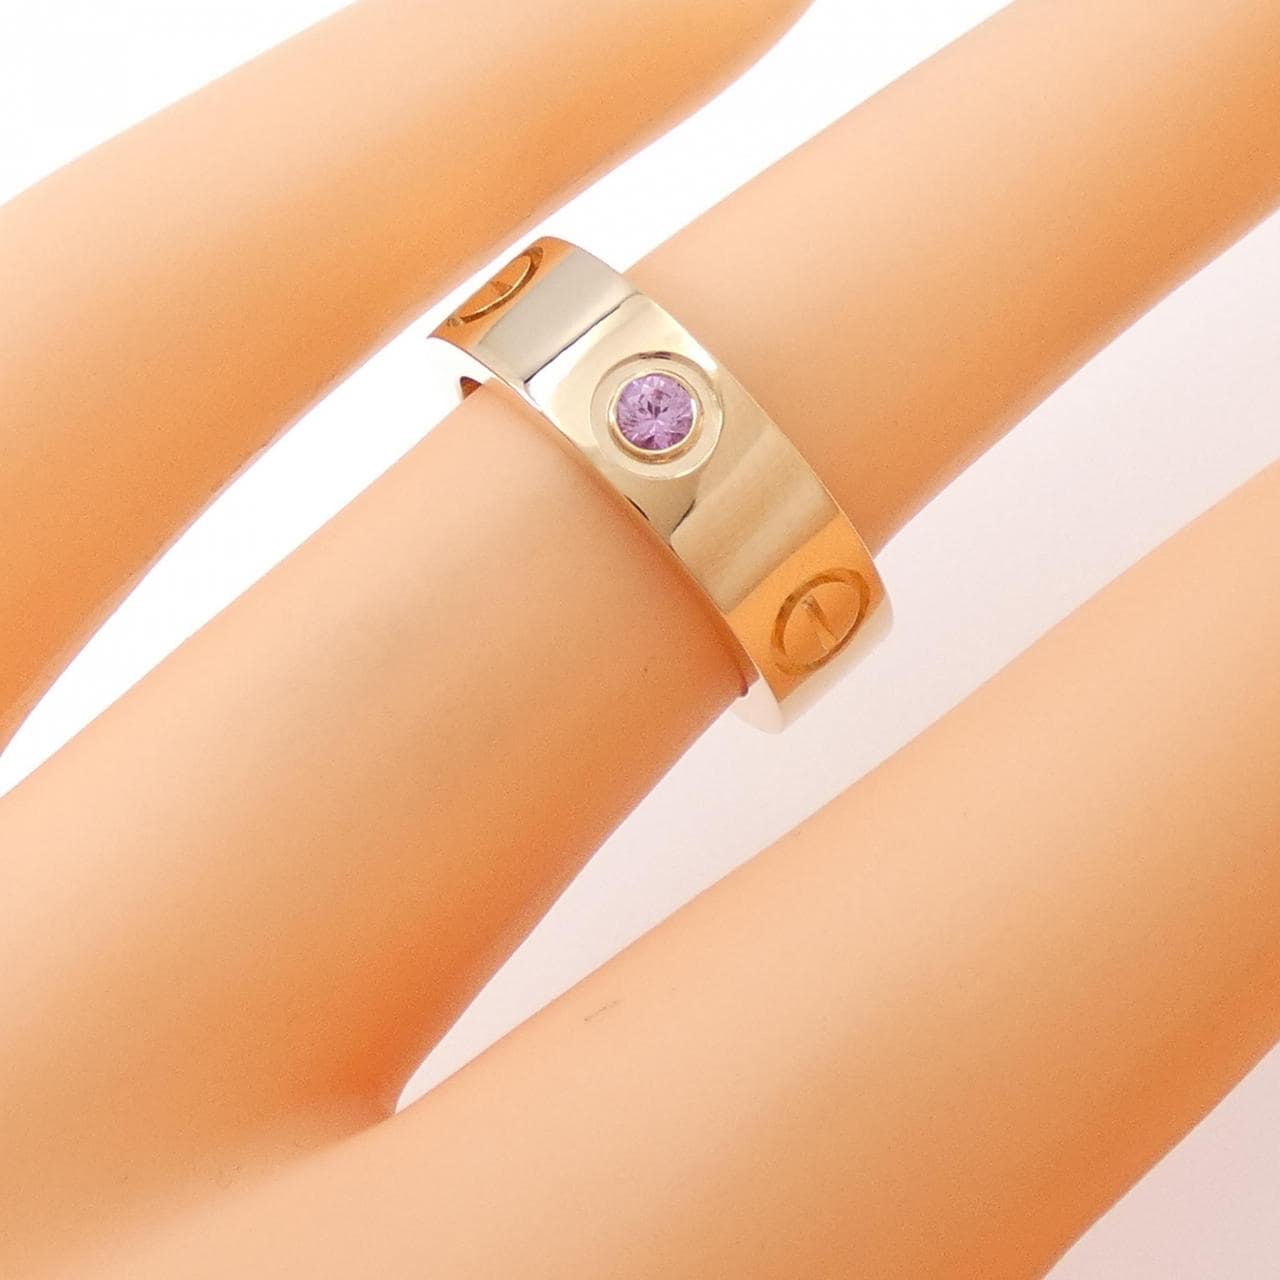 CARTIER LOVE 1P ring